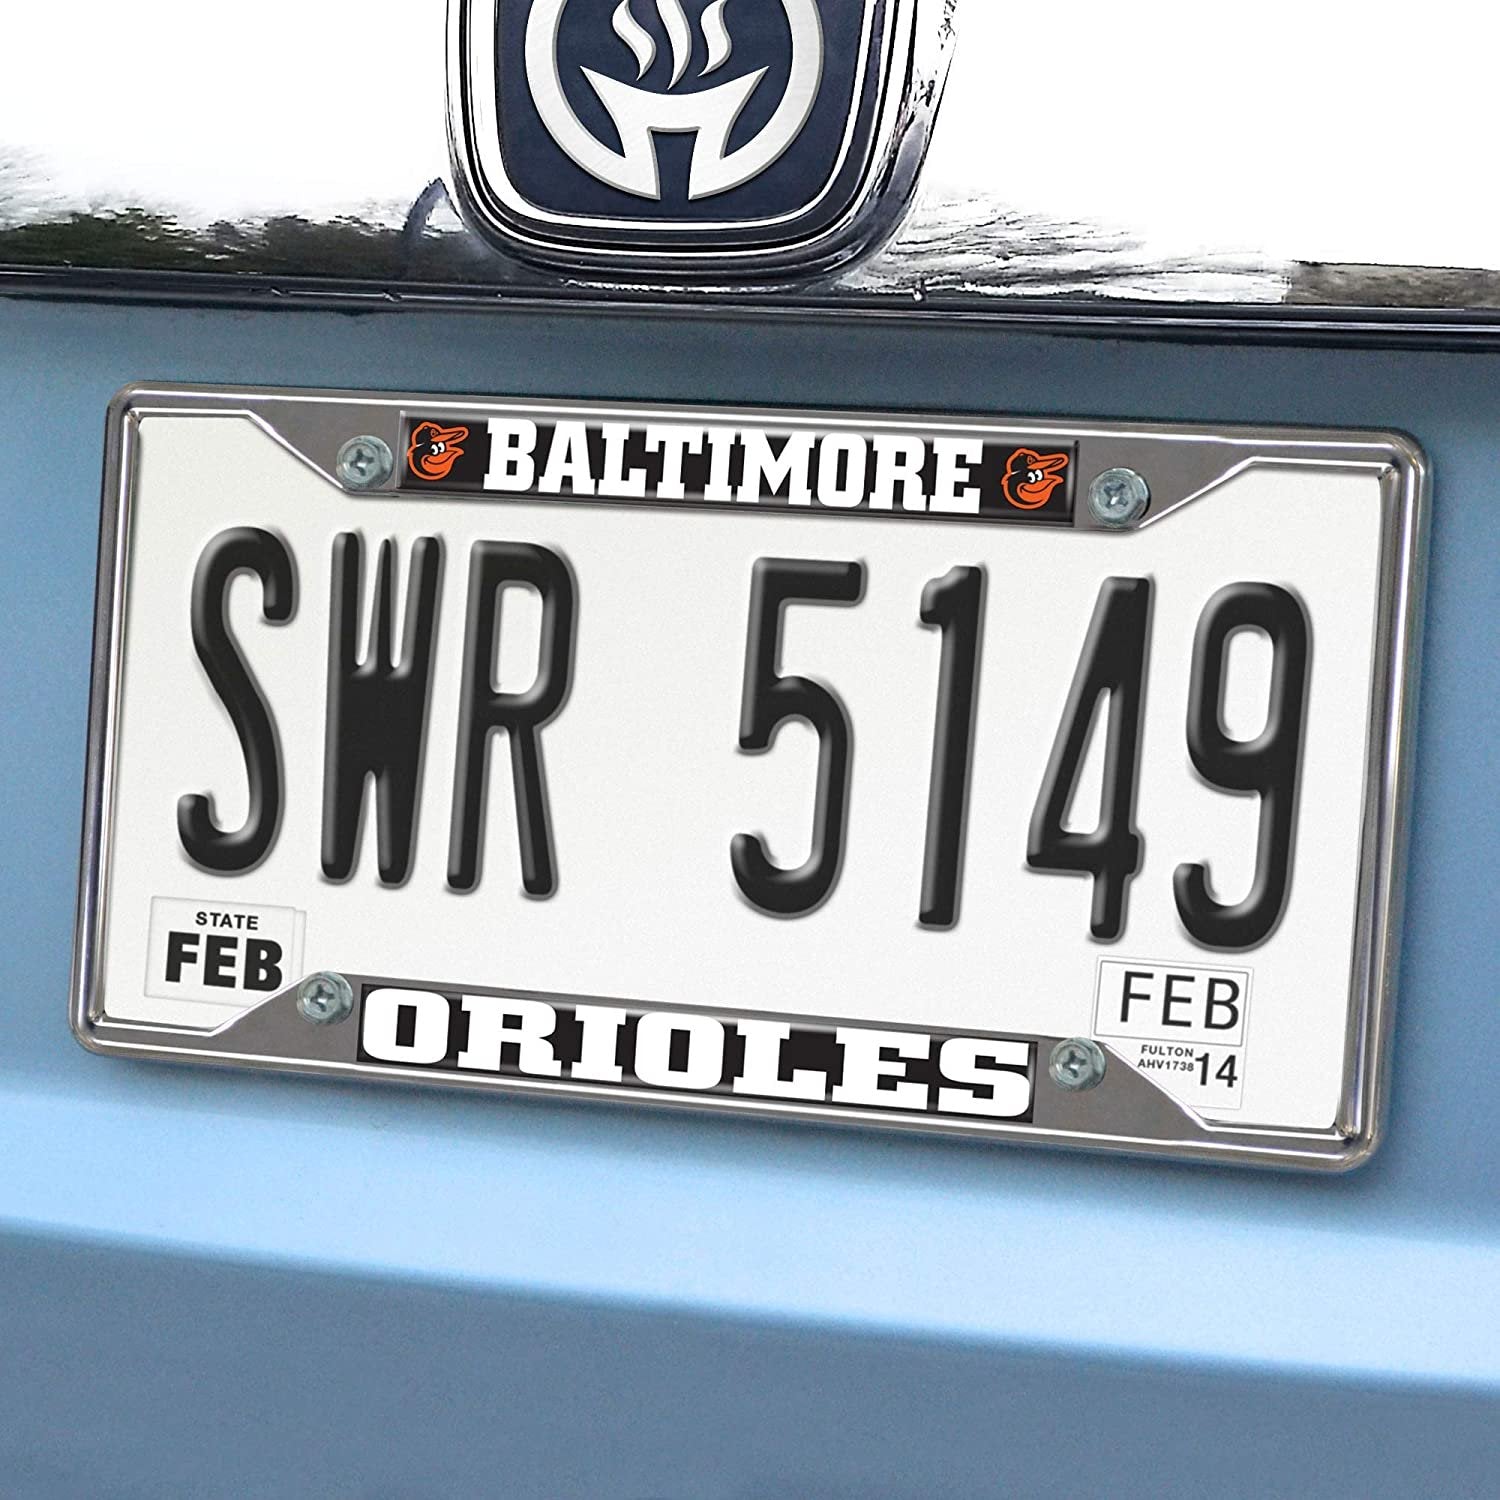 Baltimore Orioles Metal License Plate Frame Tag Cover Chrome 6x12 Inch